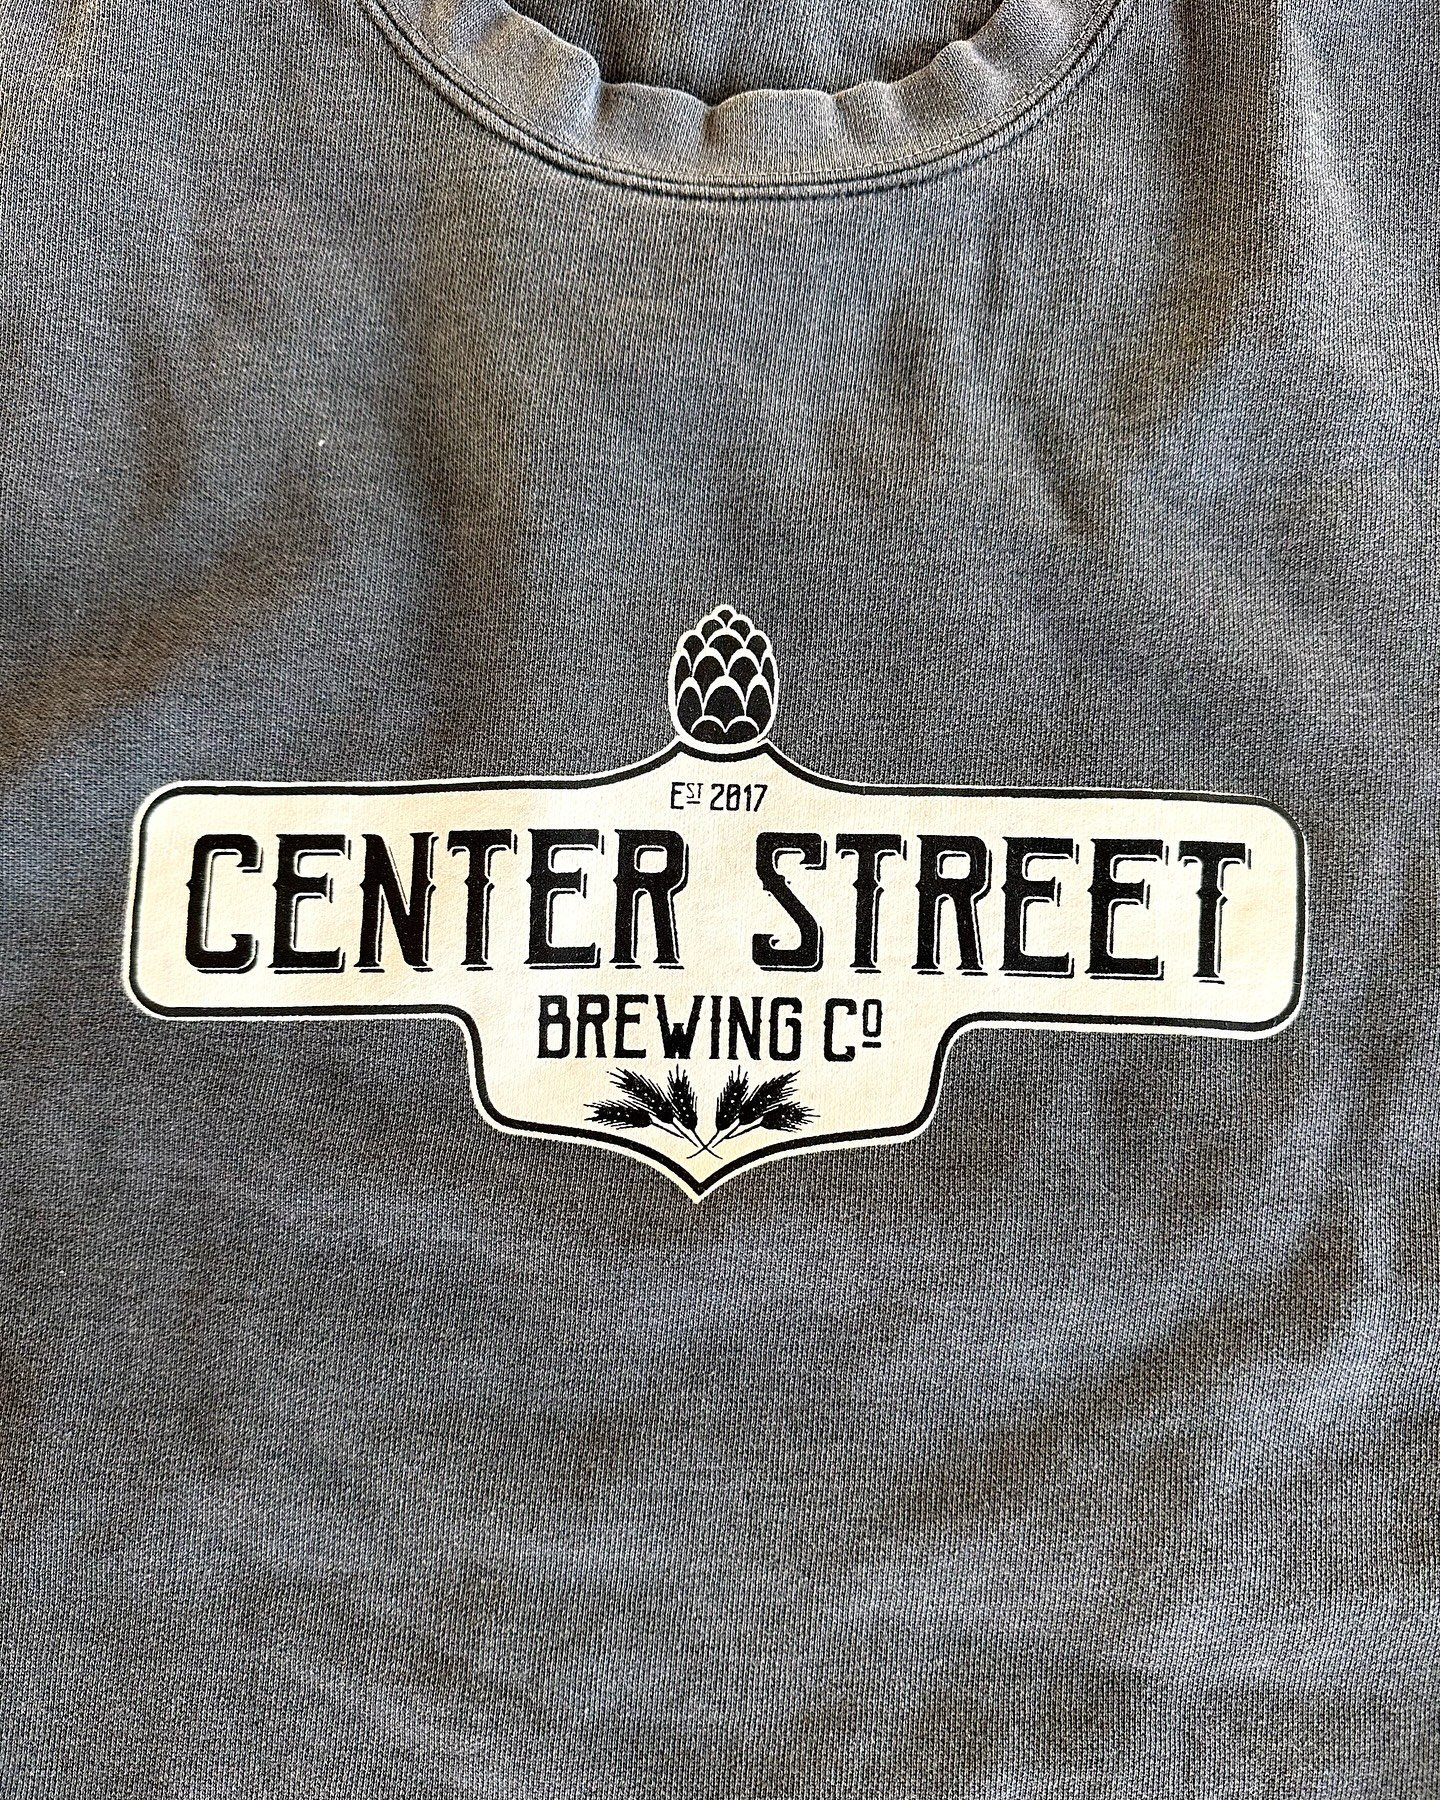 CSBC Theme Night tonight!! Wear any CSBC merchandise tonight and receive $1 off draft beers! Celebrate our 5 year anniversary tonight with cold beer, live music, and your favorite CSBC merch! 
Music starts at 6 PM tonight and Banana Hammock is flowin